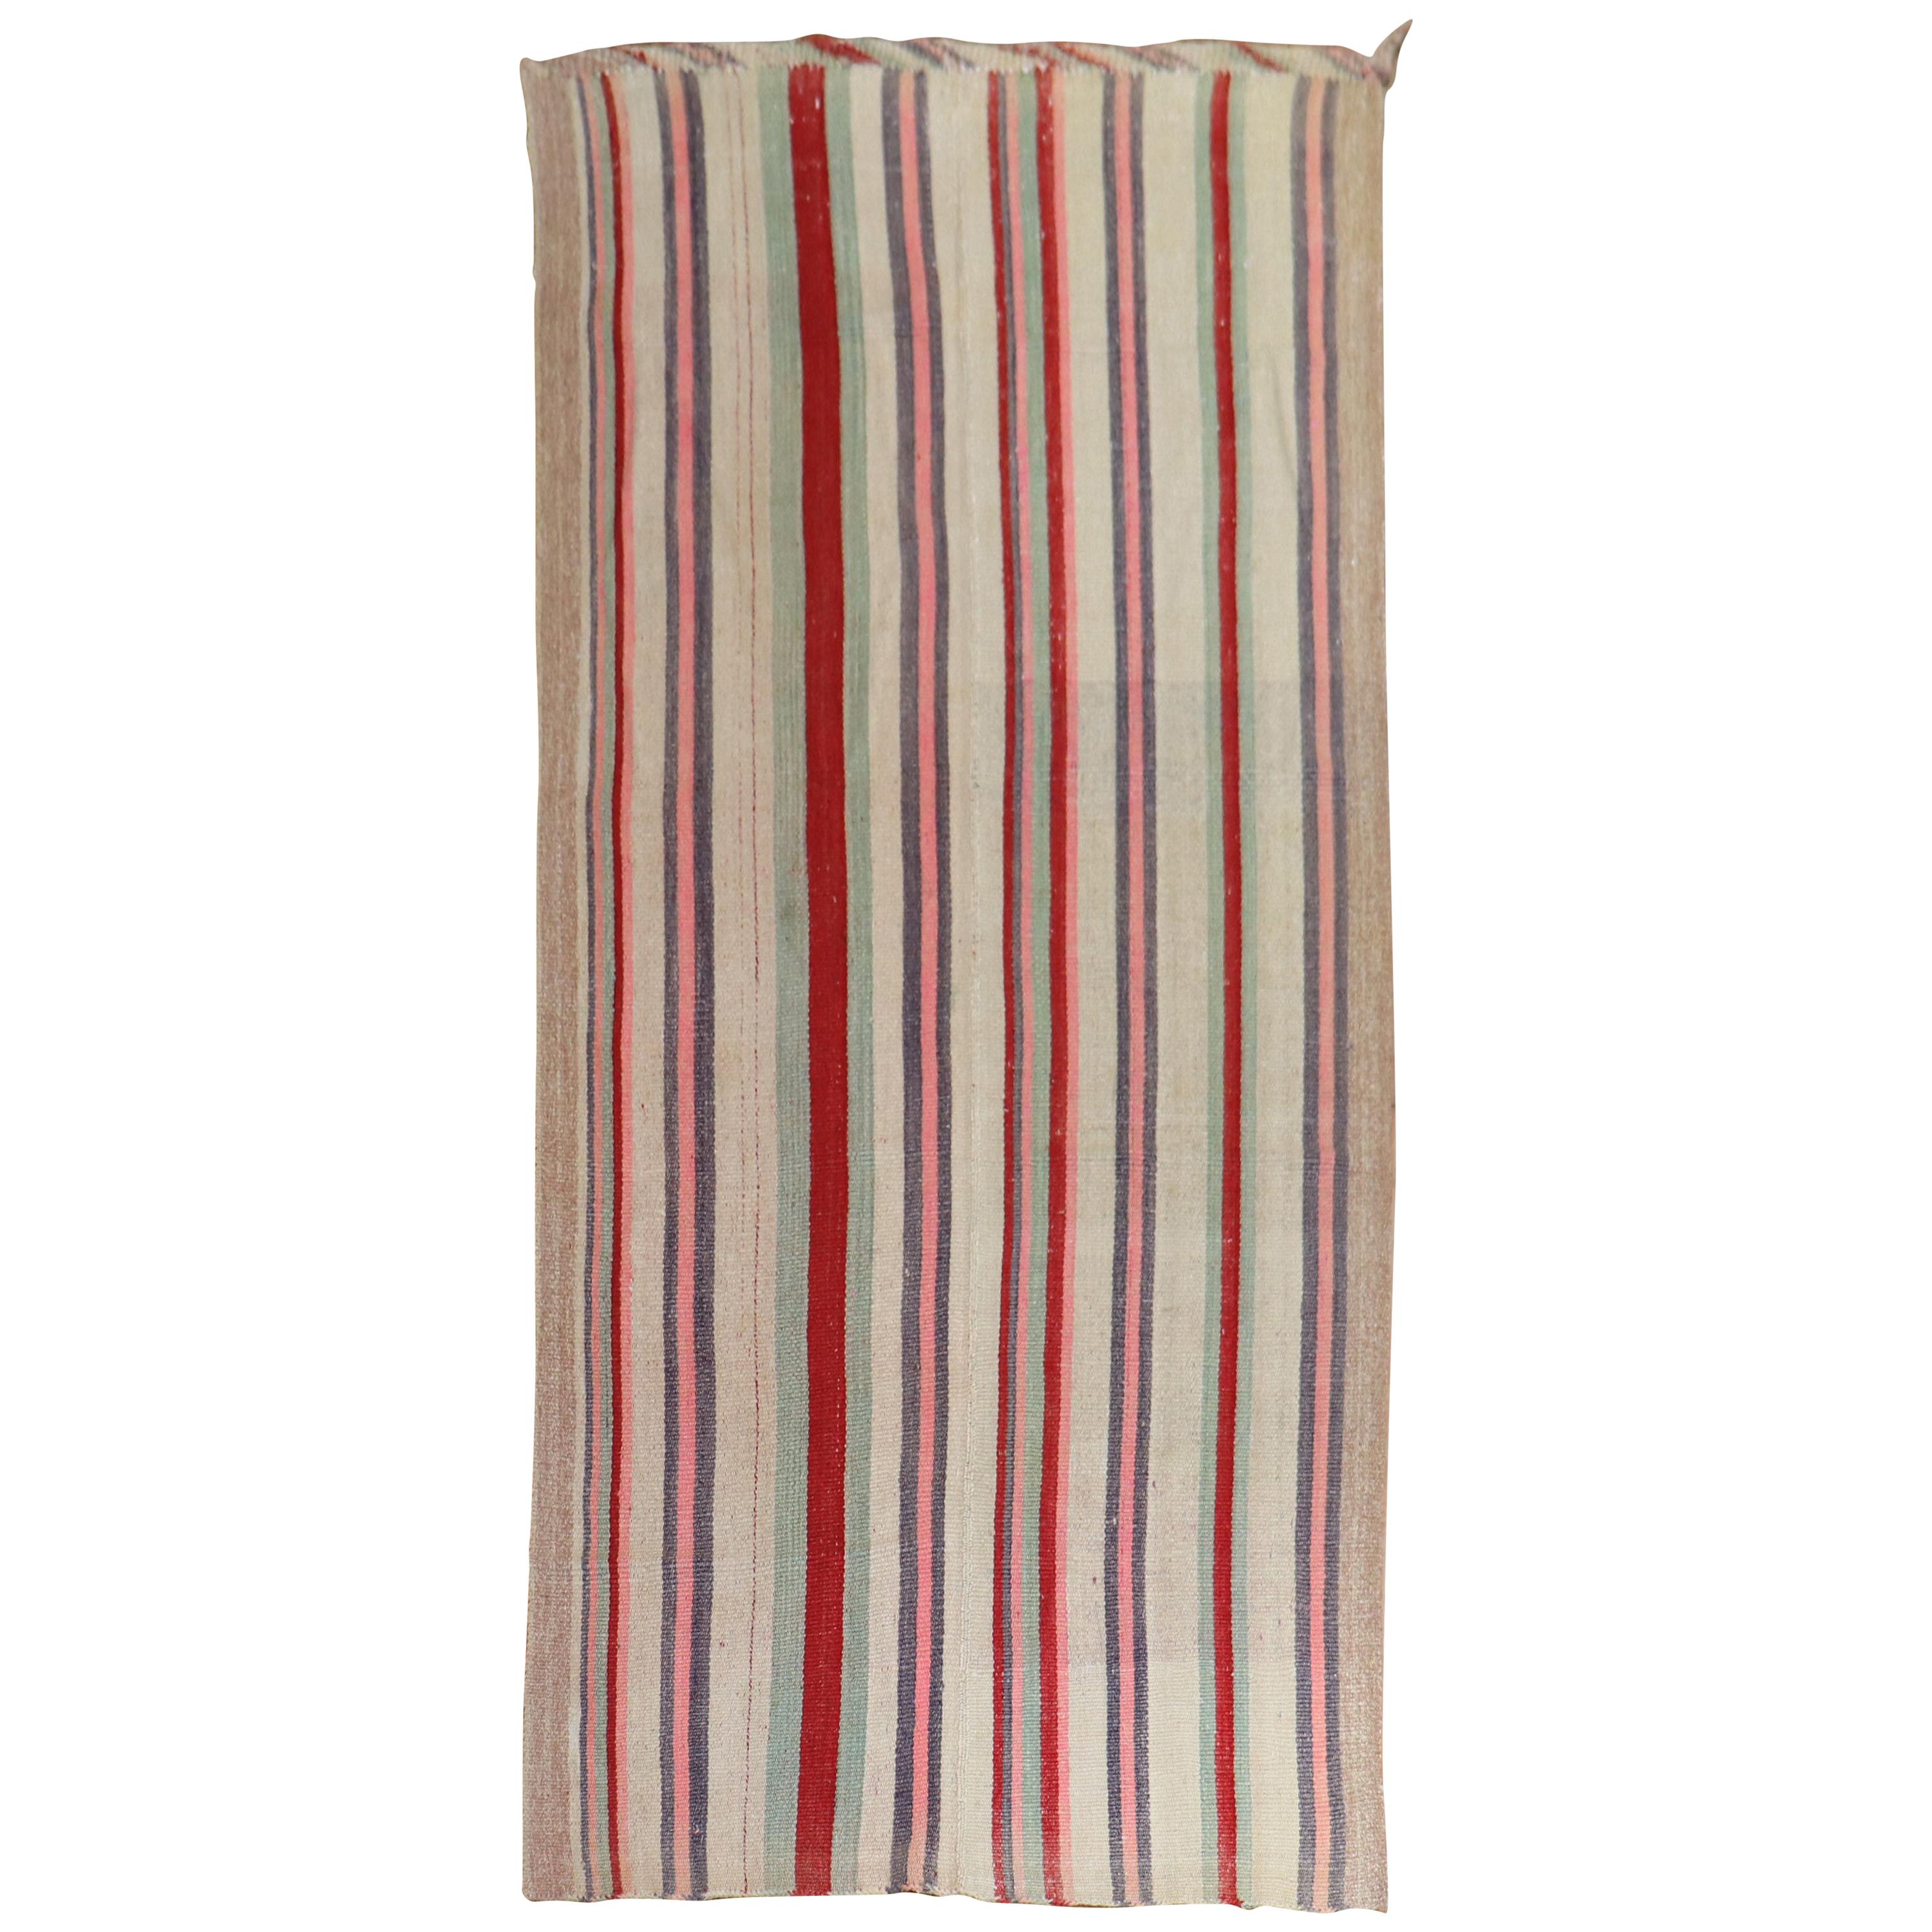 A Long Striped Wool Kilim Runner For Sale at 1stDibs